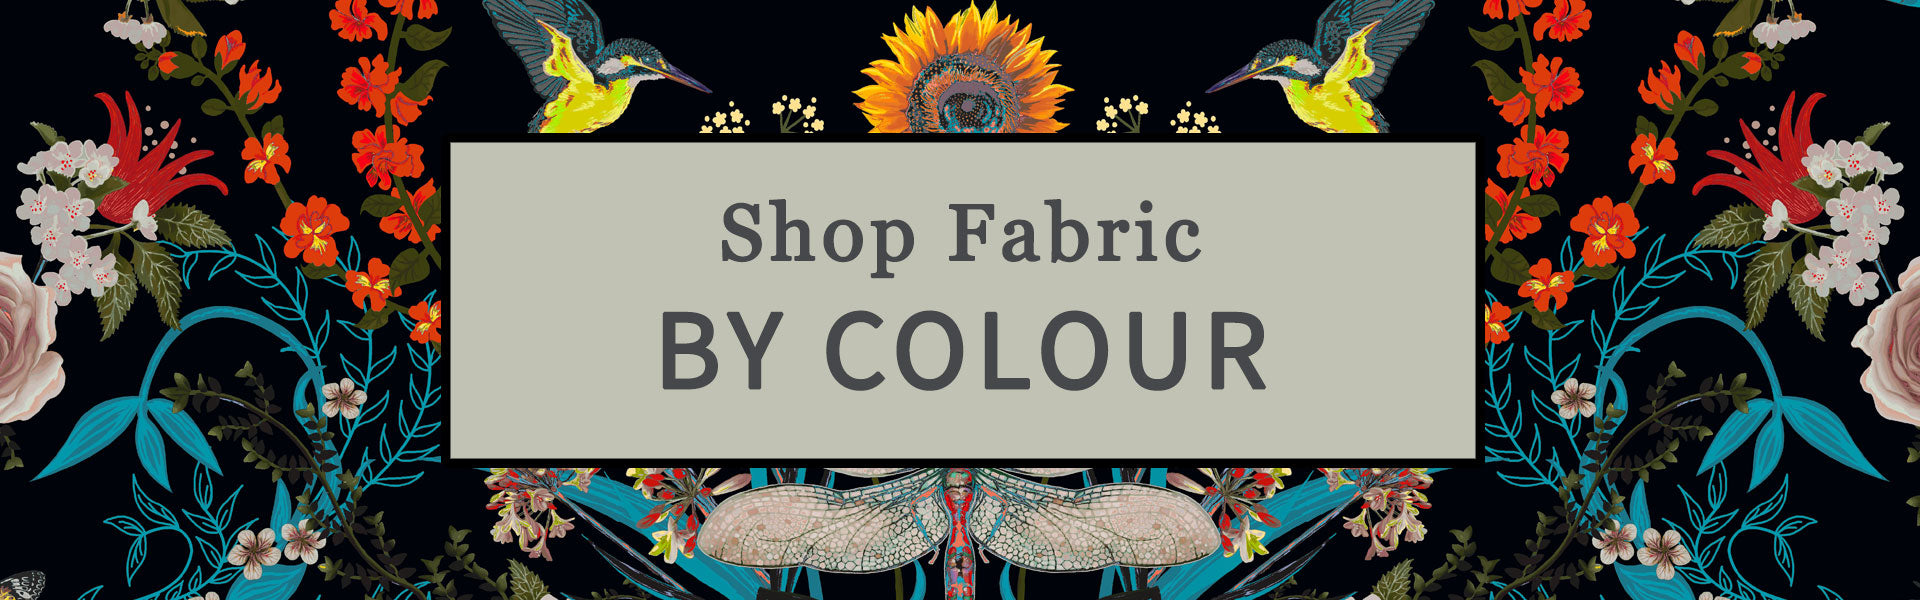 Shop Patterned Designer Fabrics for Interiors by Colour